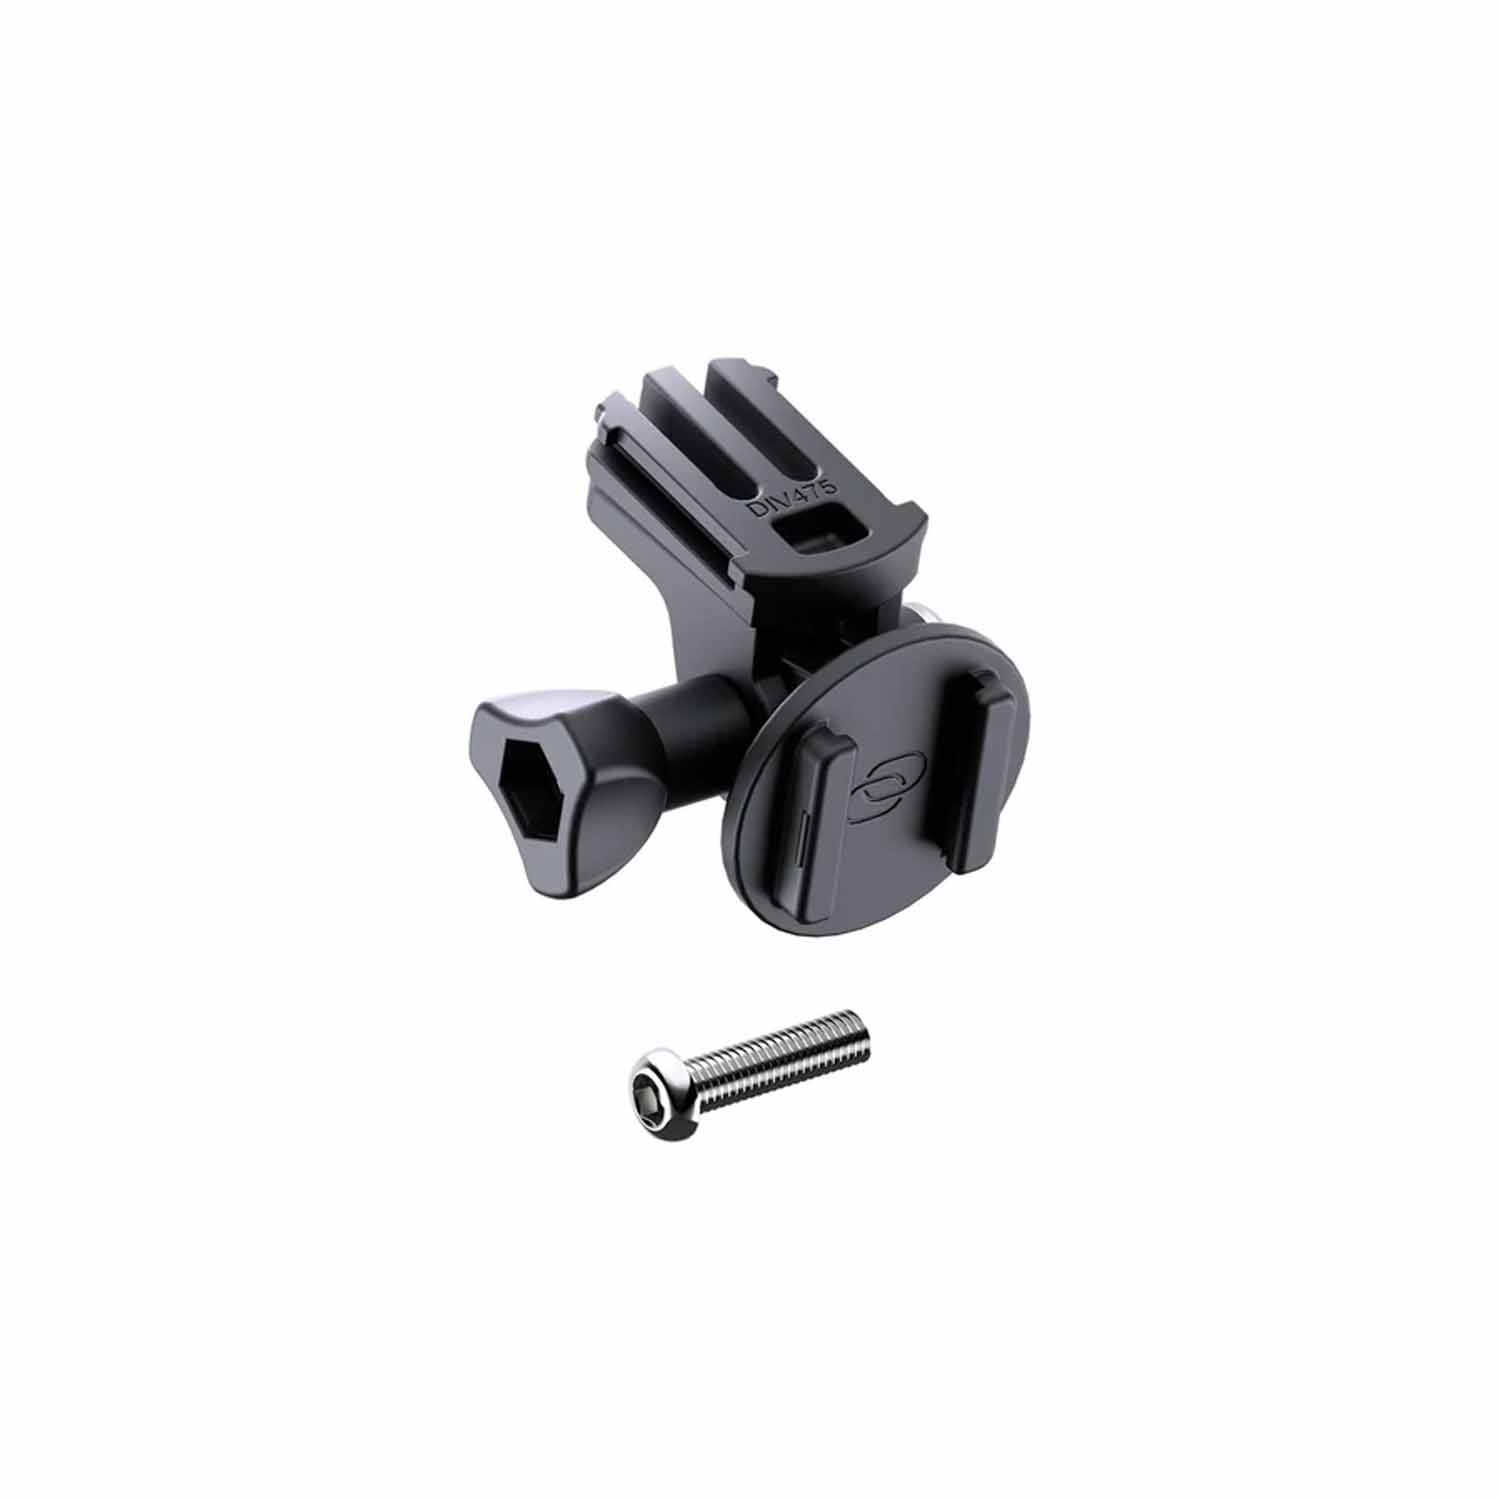 SP Connect Camera / Light Adapter Kit